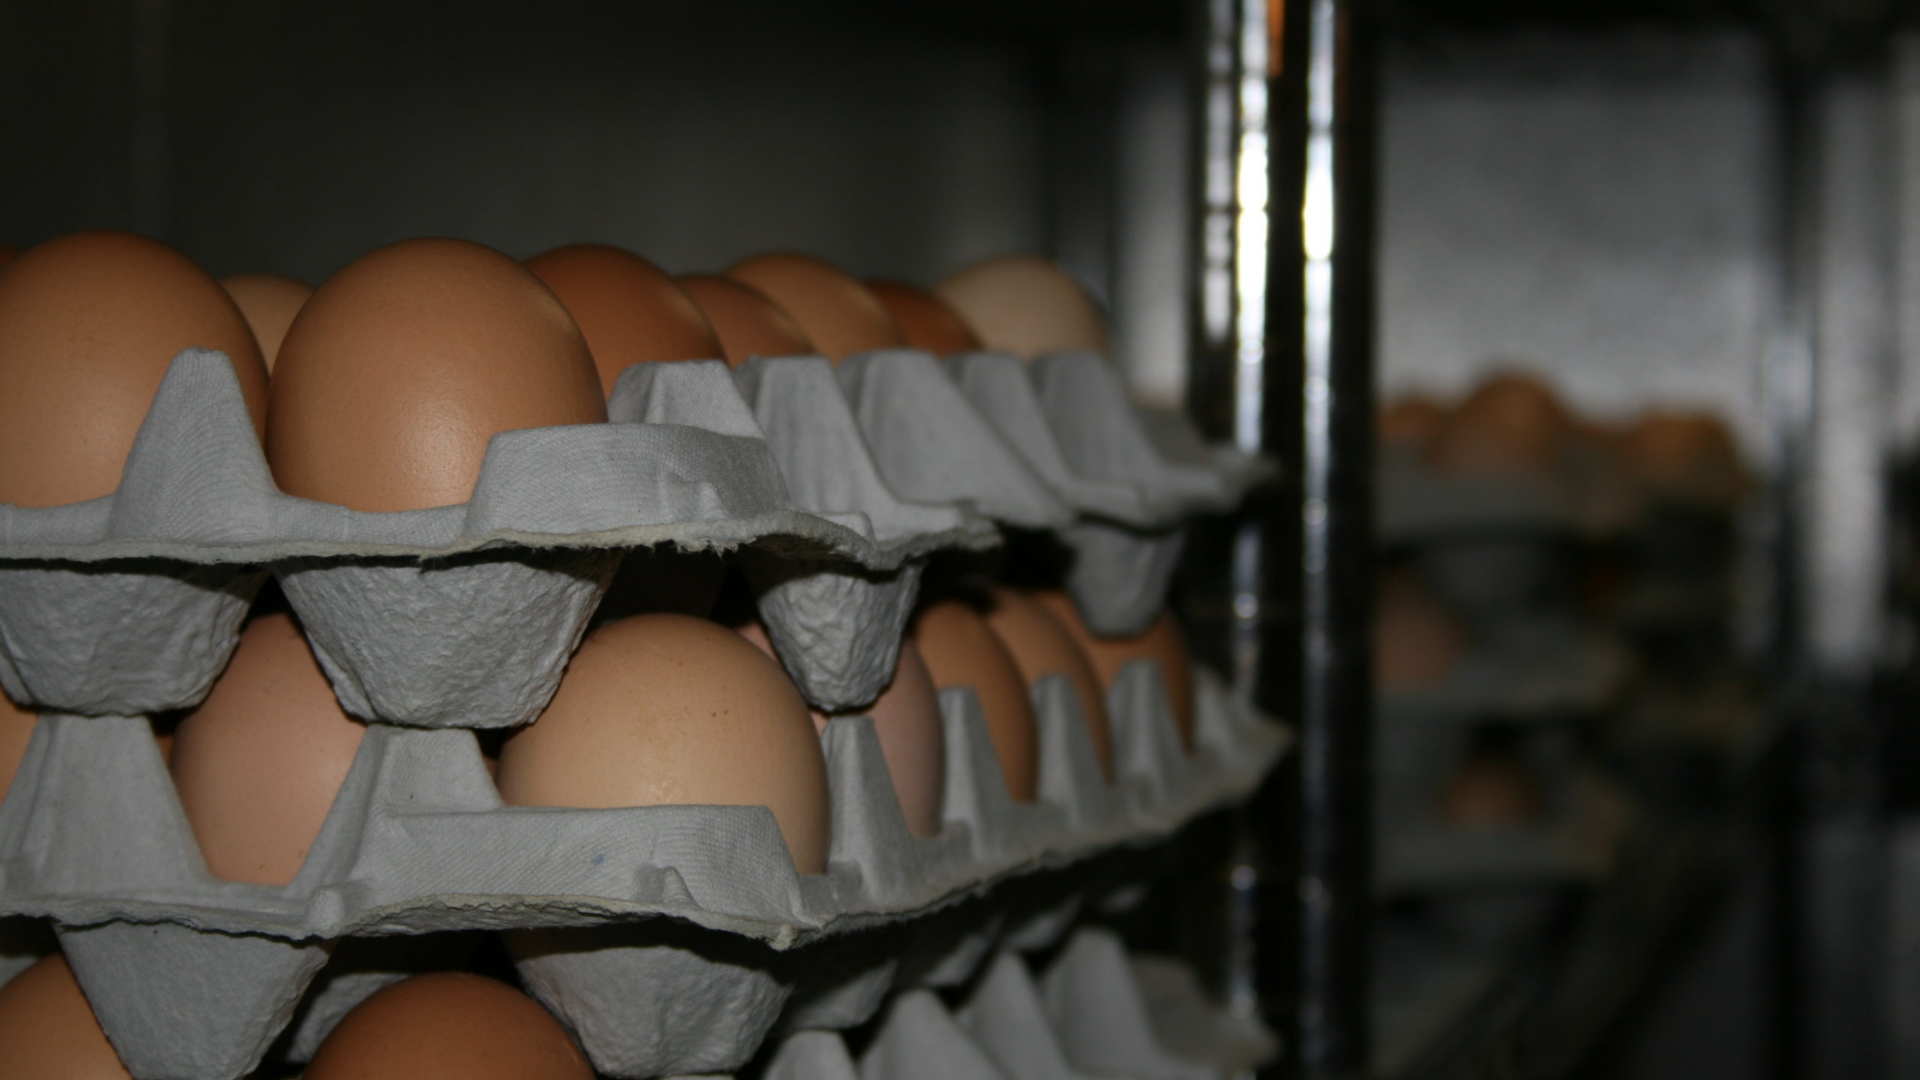 DOH has advised the public against using frozen eggs as a fresh egg substitute since it may be harmful to their health.